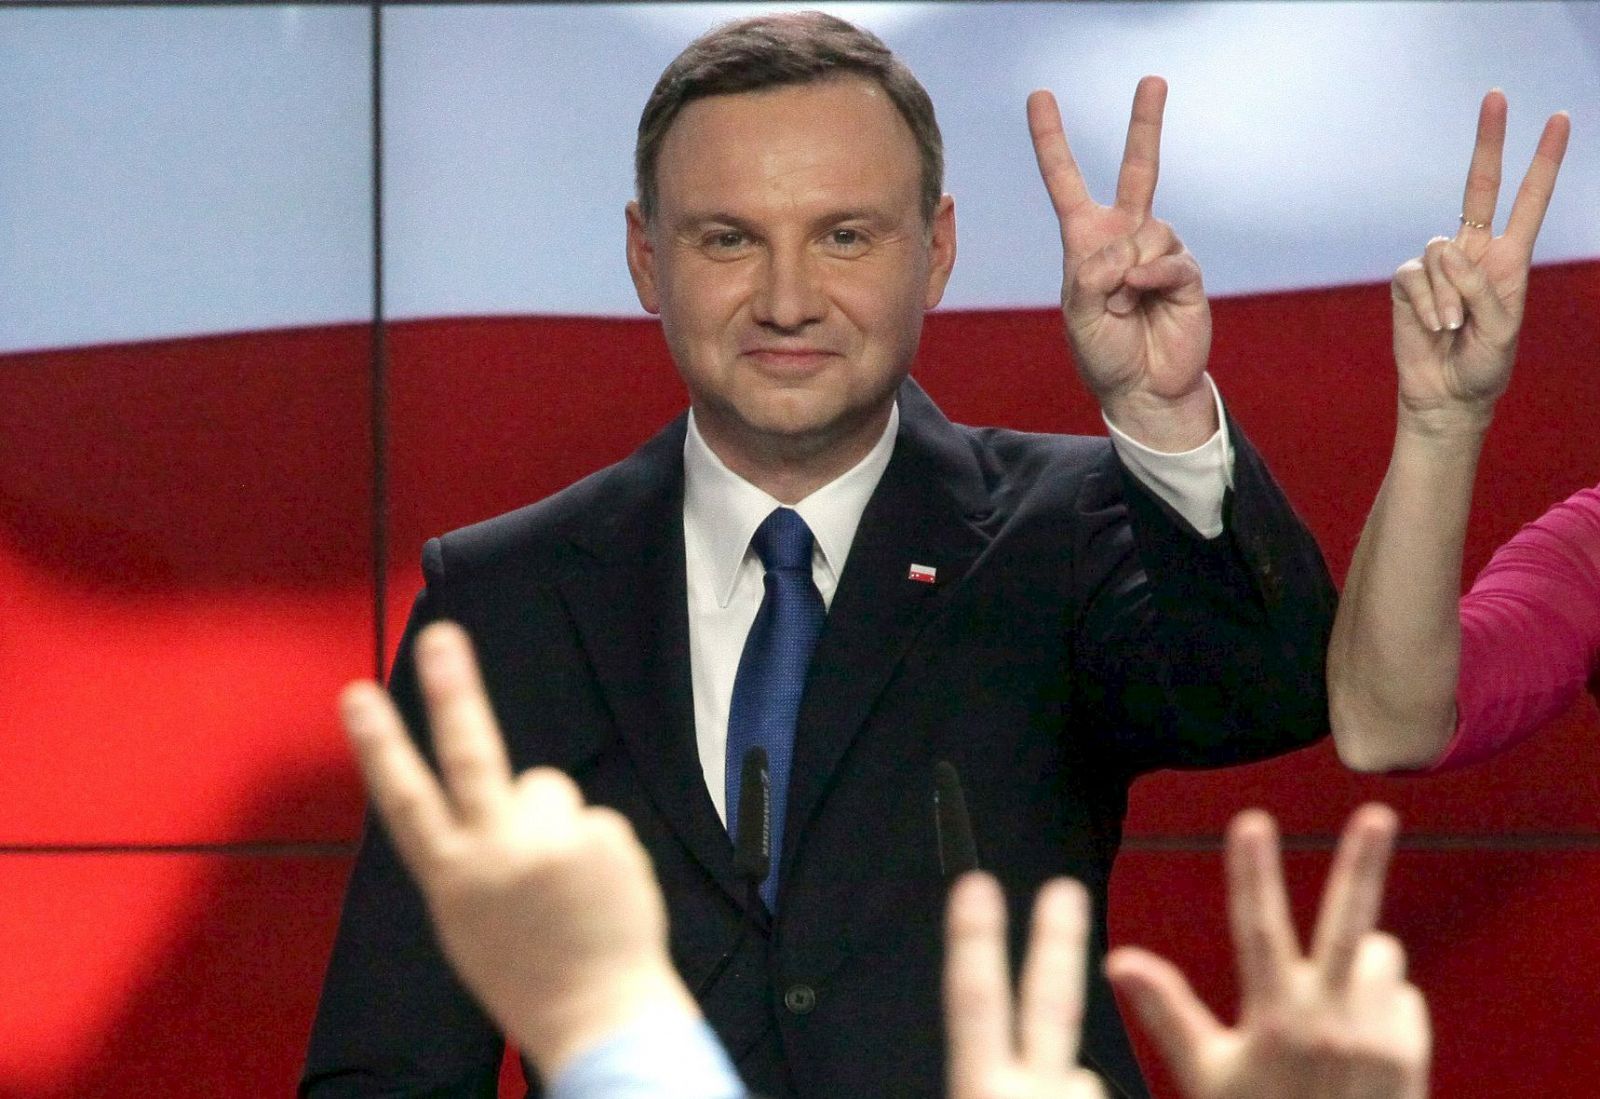 Duda candidate of Law and Justice party shows victory sign after announcement of first exit polls in first round of Polish presidential elections in Warsaw